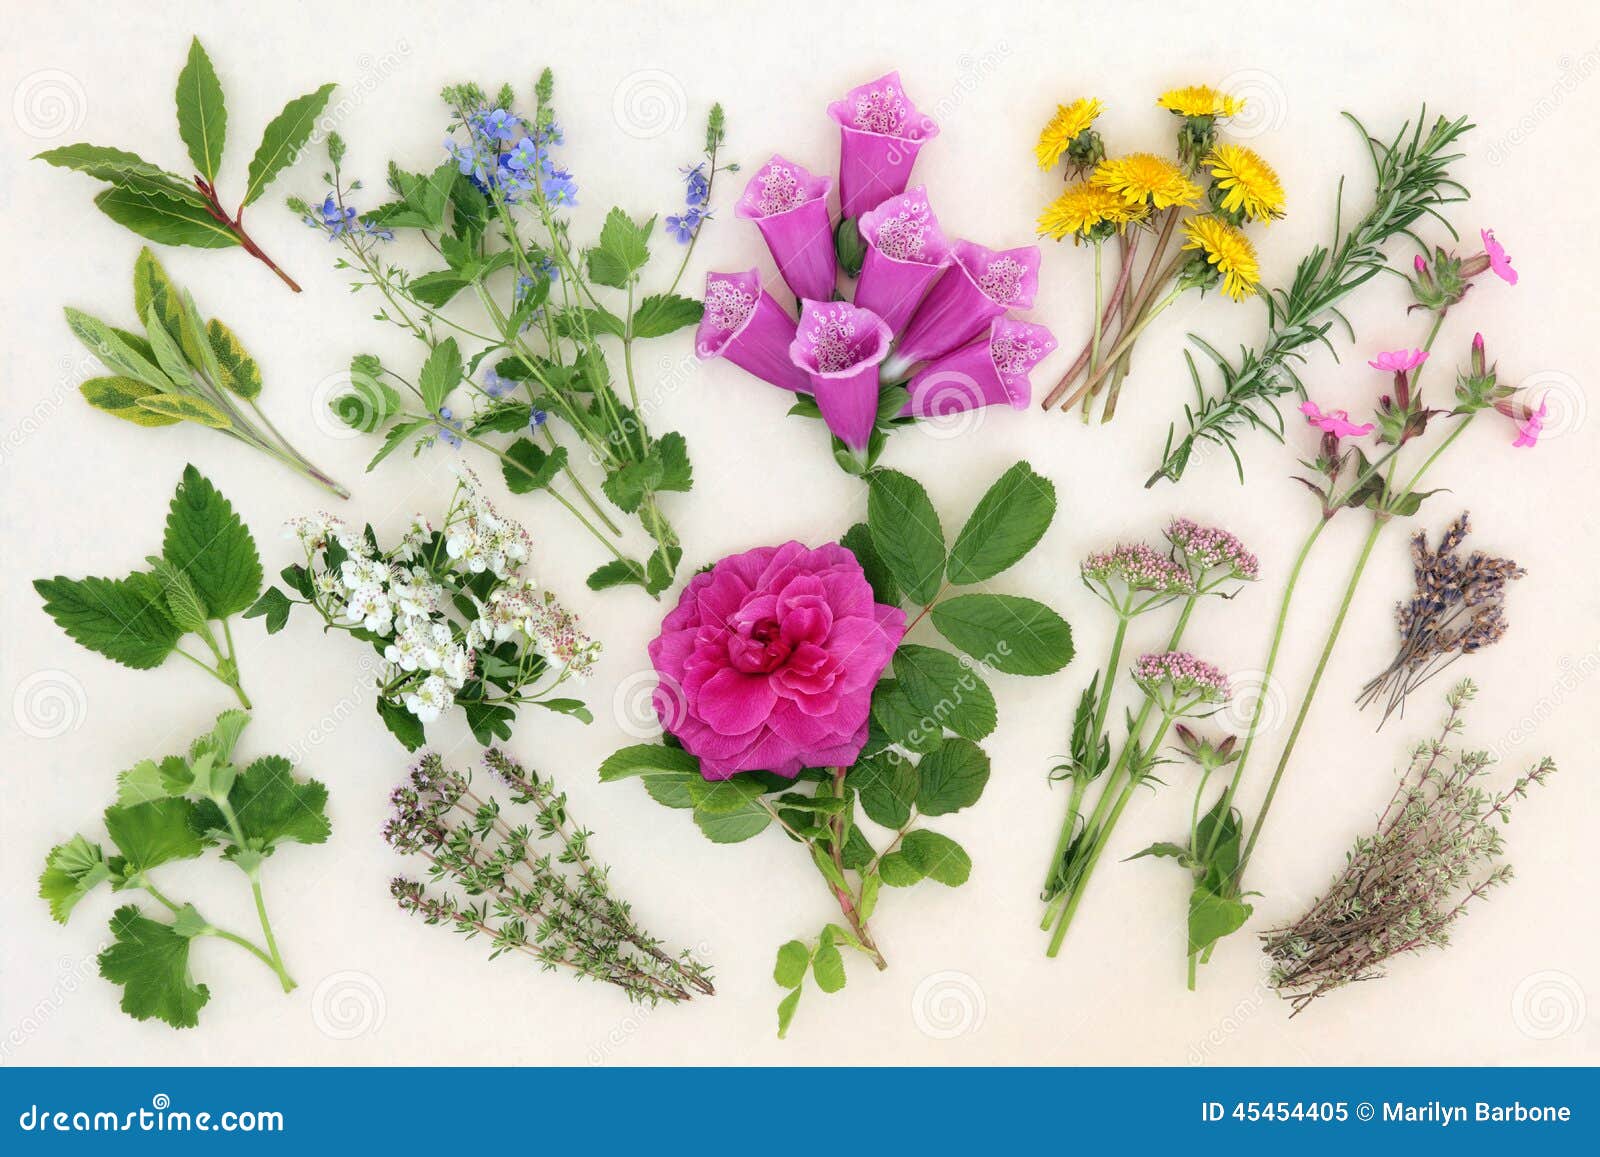 naturopathic herbs and flowers